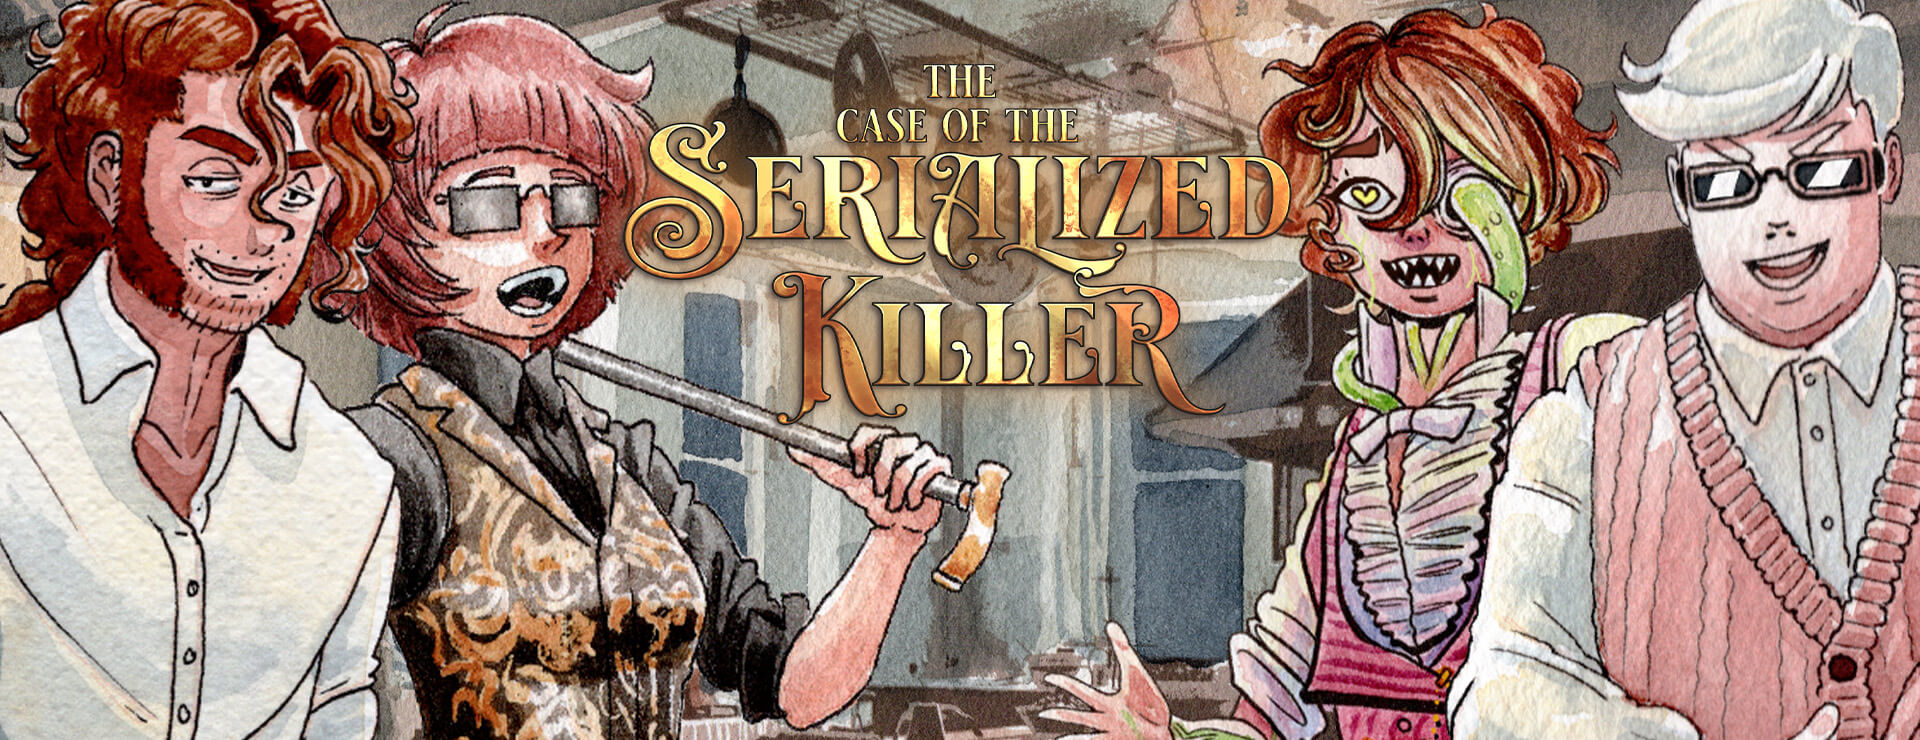 The Case of the Serialized Killer - 虚拟小说 遊戲